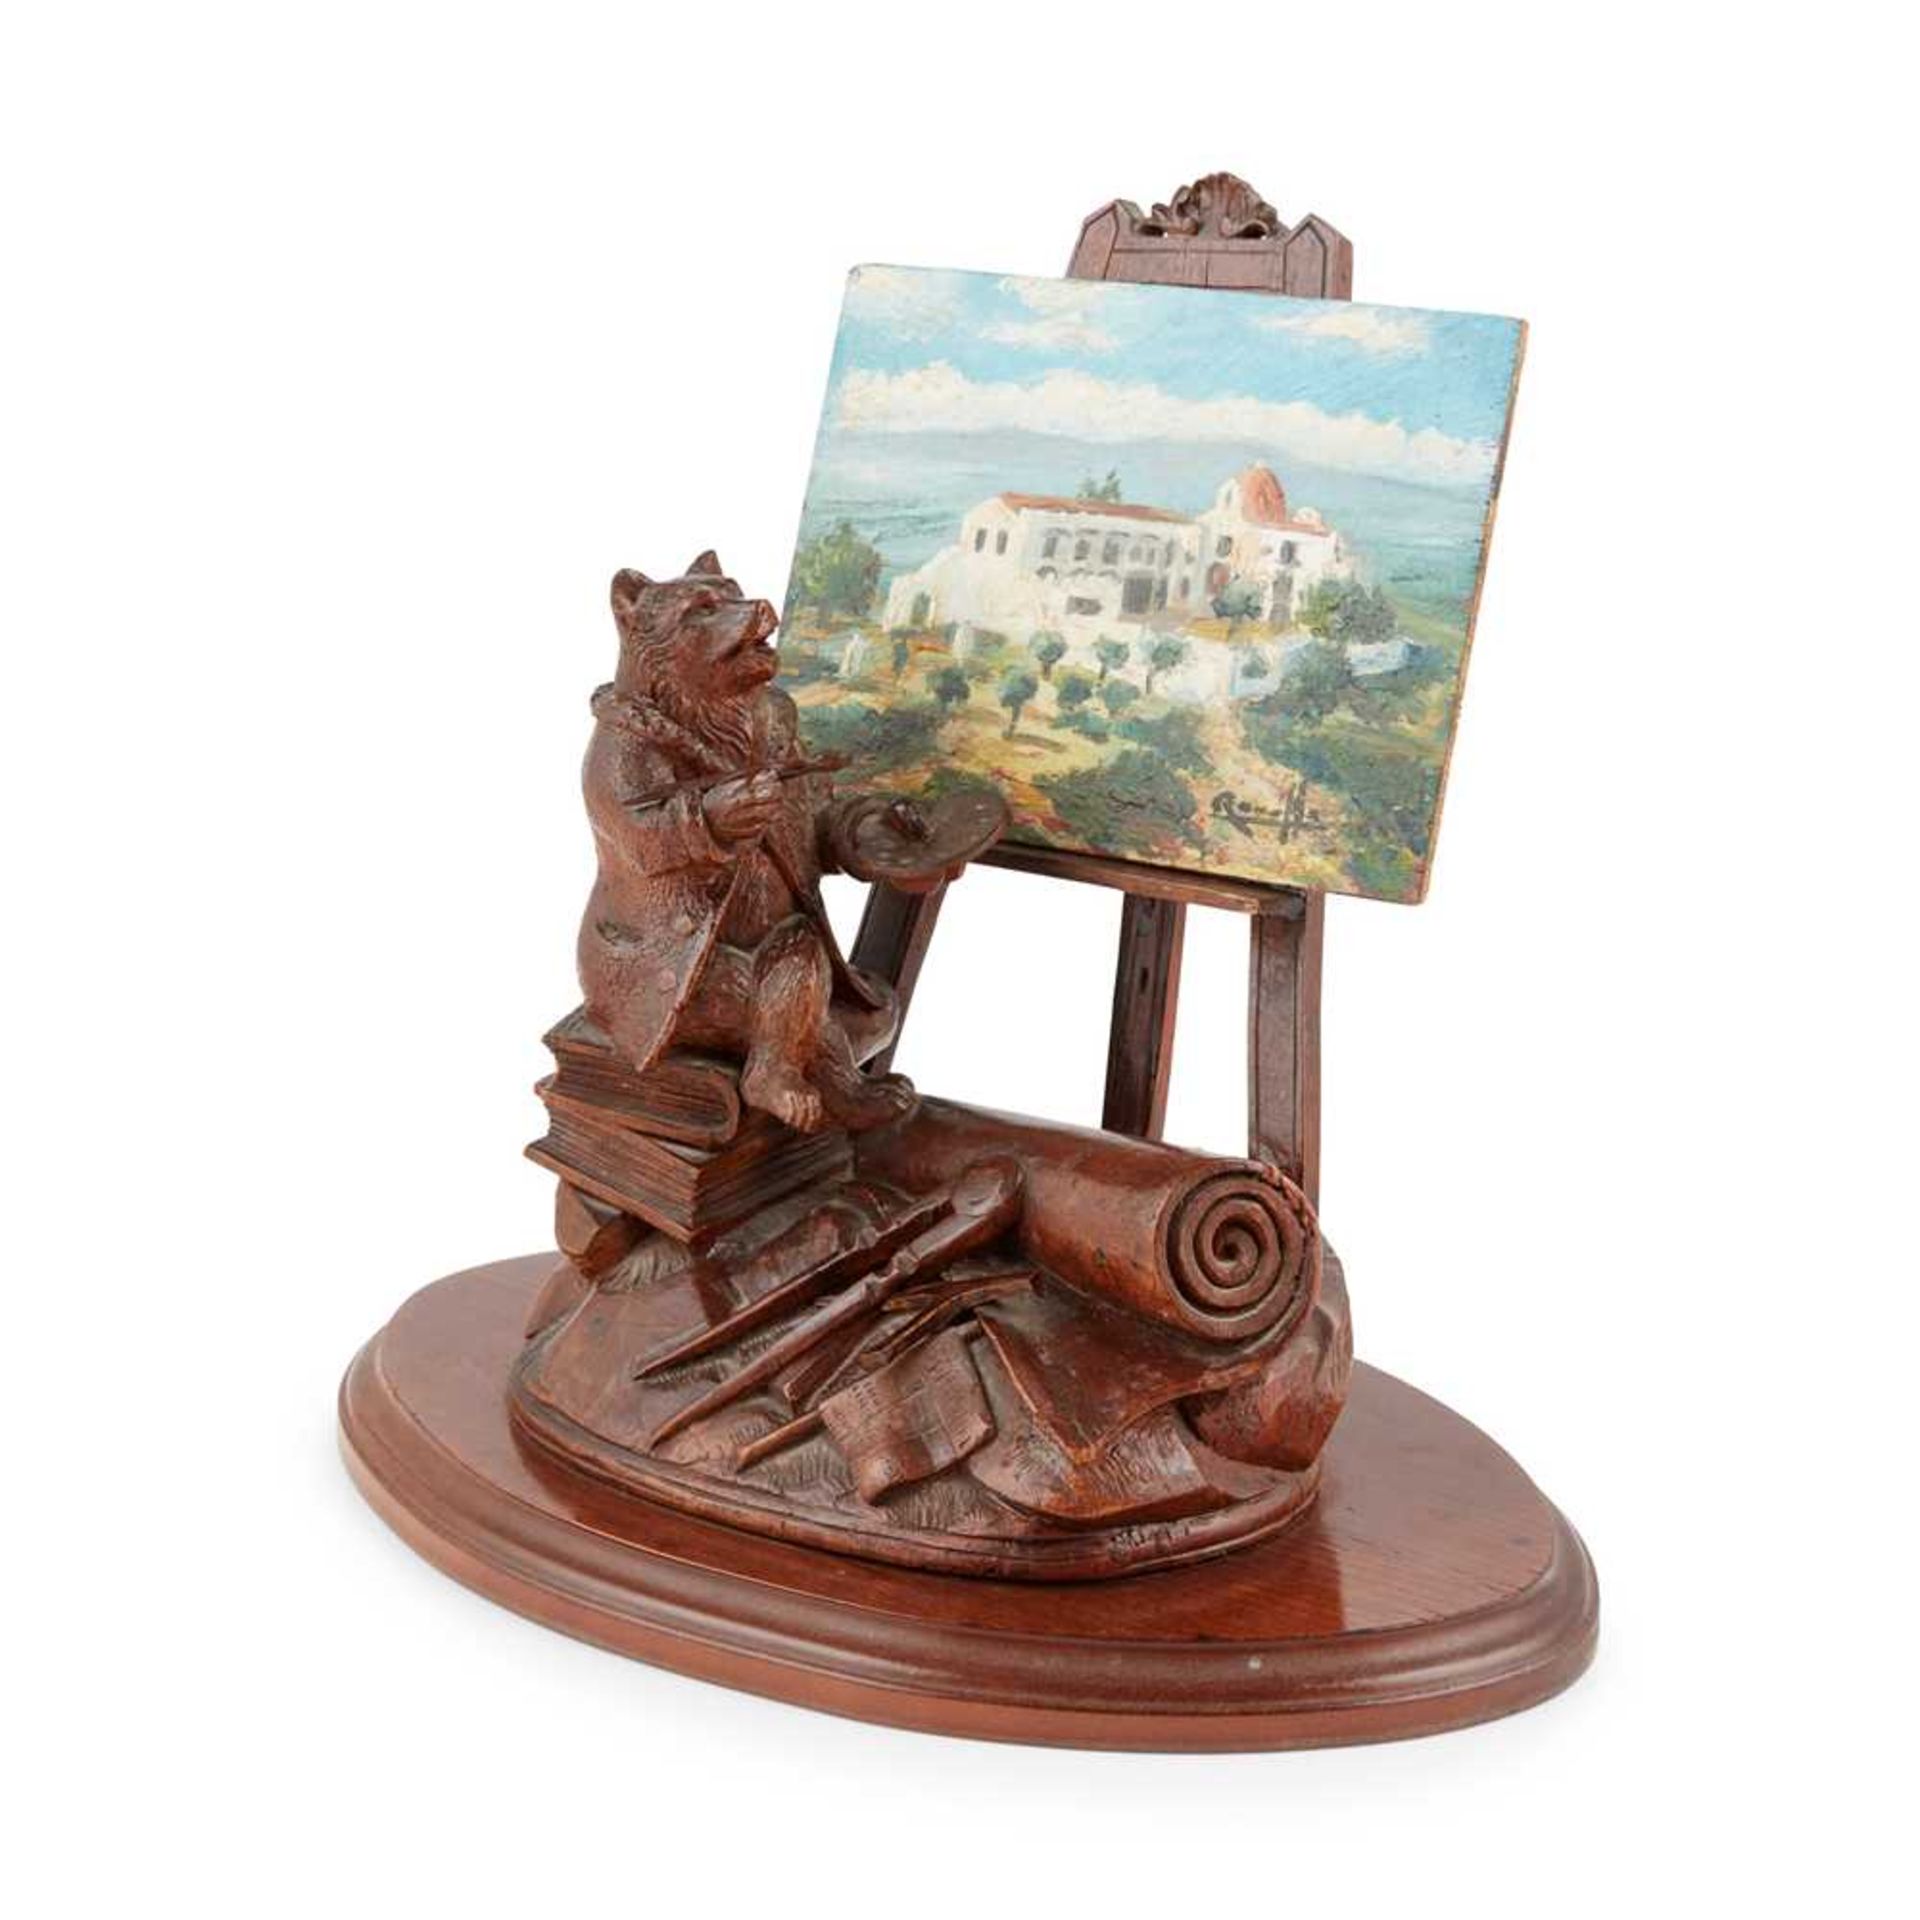 BLACK FOREST NOVELTY CARVING OF A BEAR AS AN ARTIST LATE 19TH CENTURY - Image 2 of 4